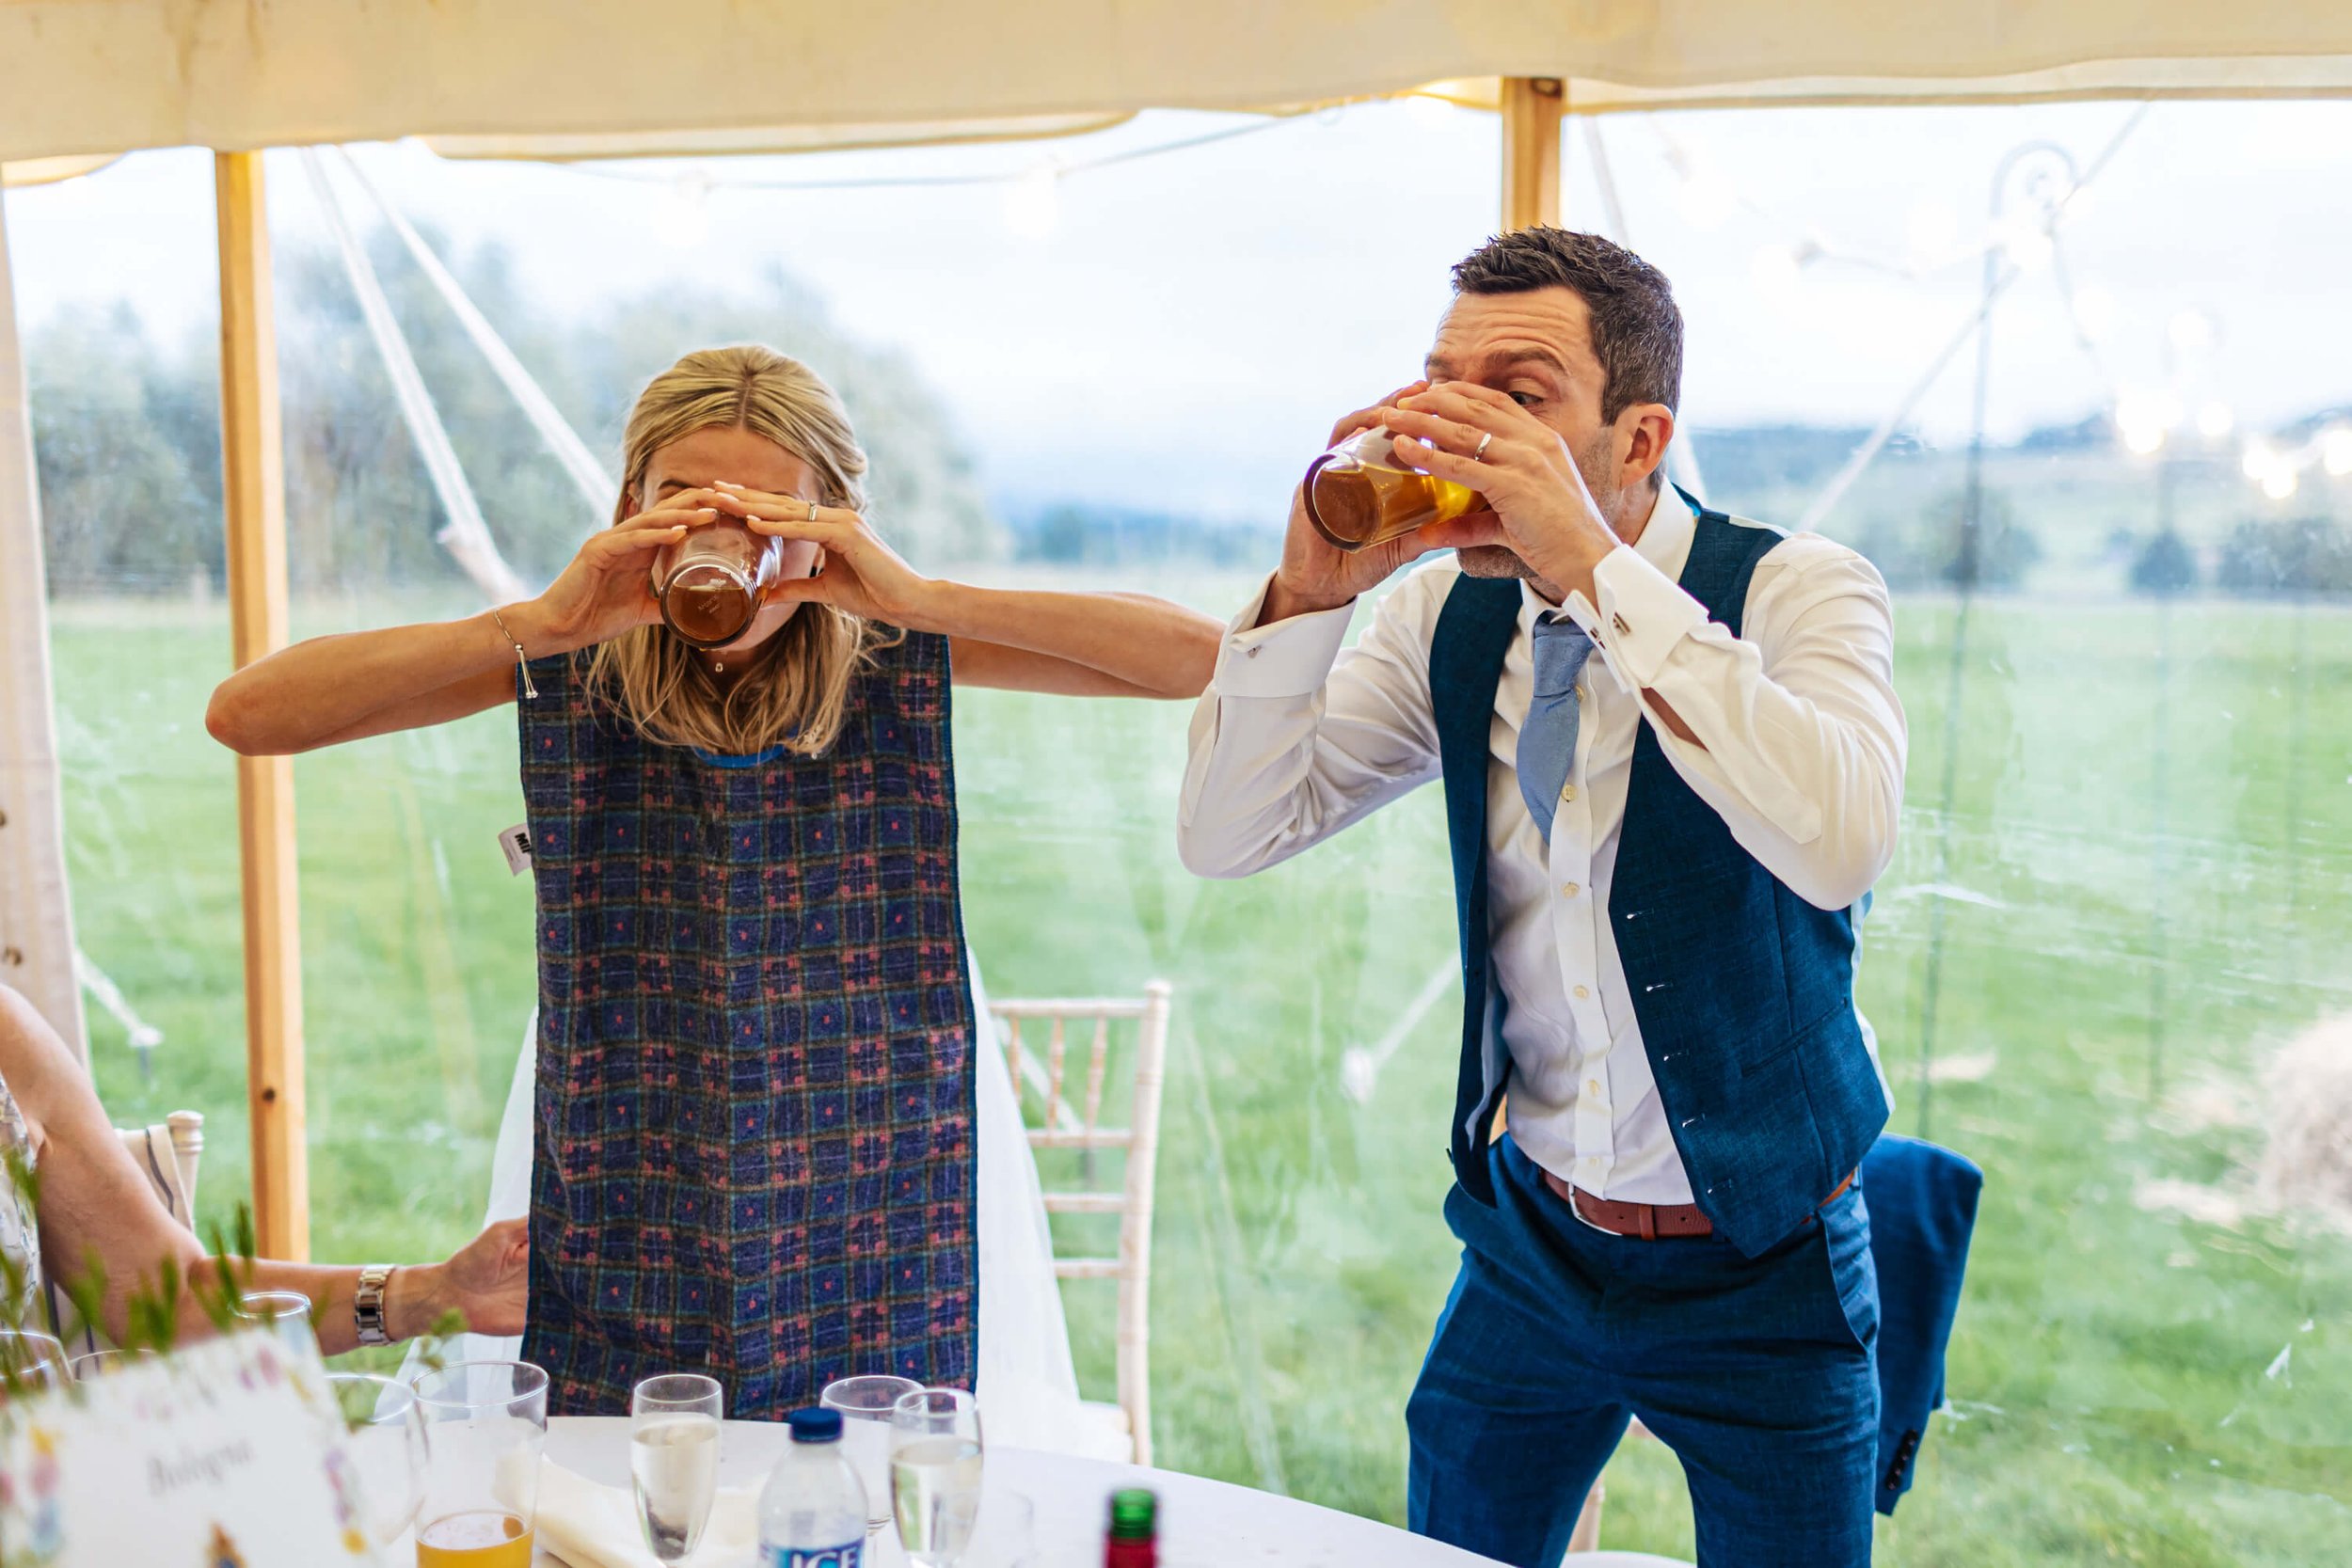 Drinking race between the bride and groom